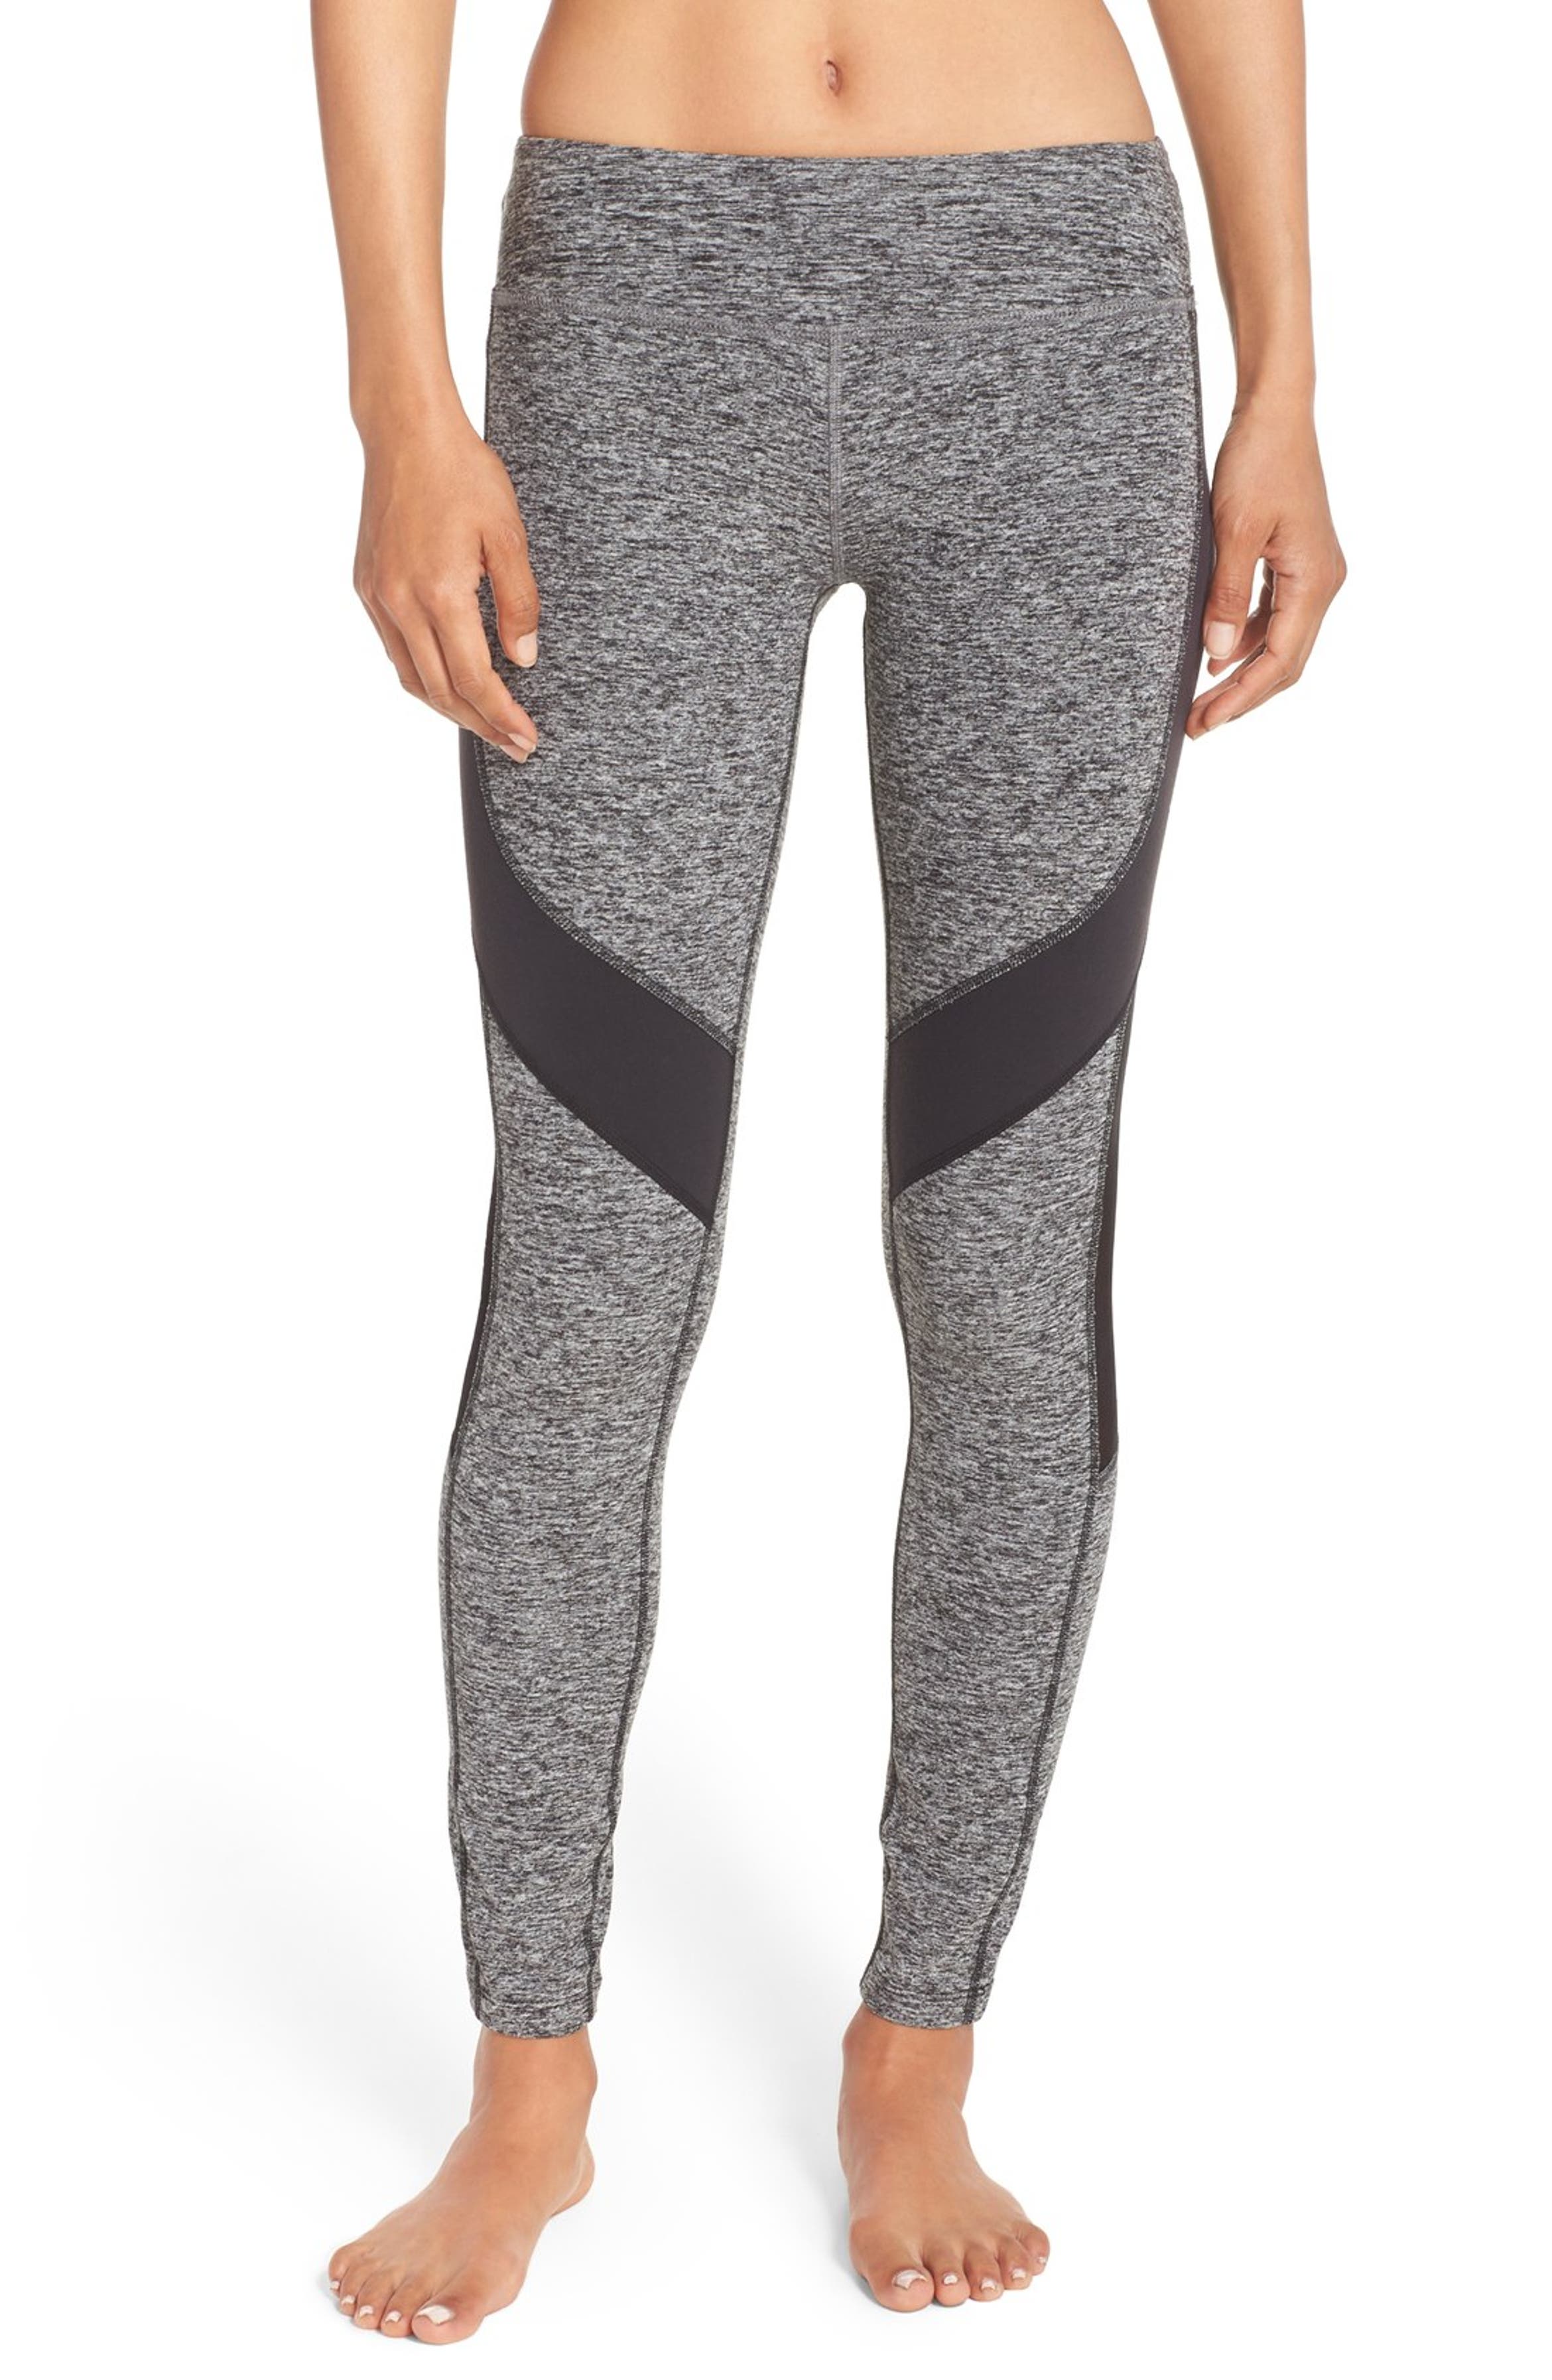 23 Best Leggings 2022 For Working Out and Lounging That Are Both